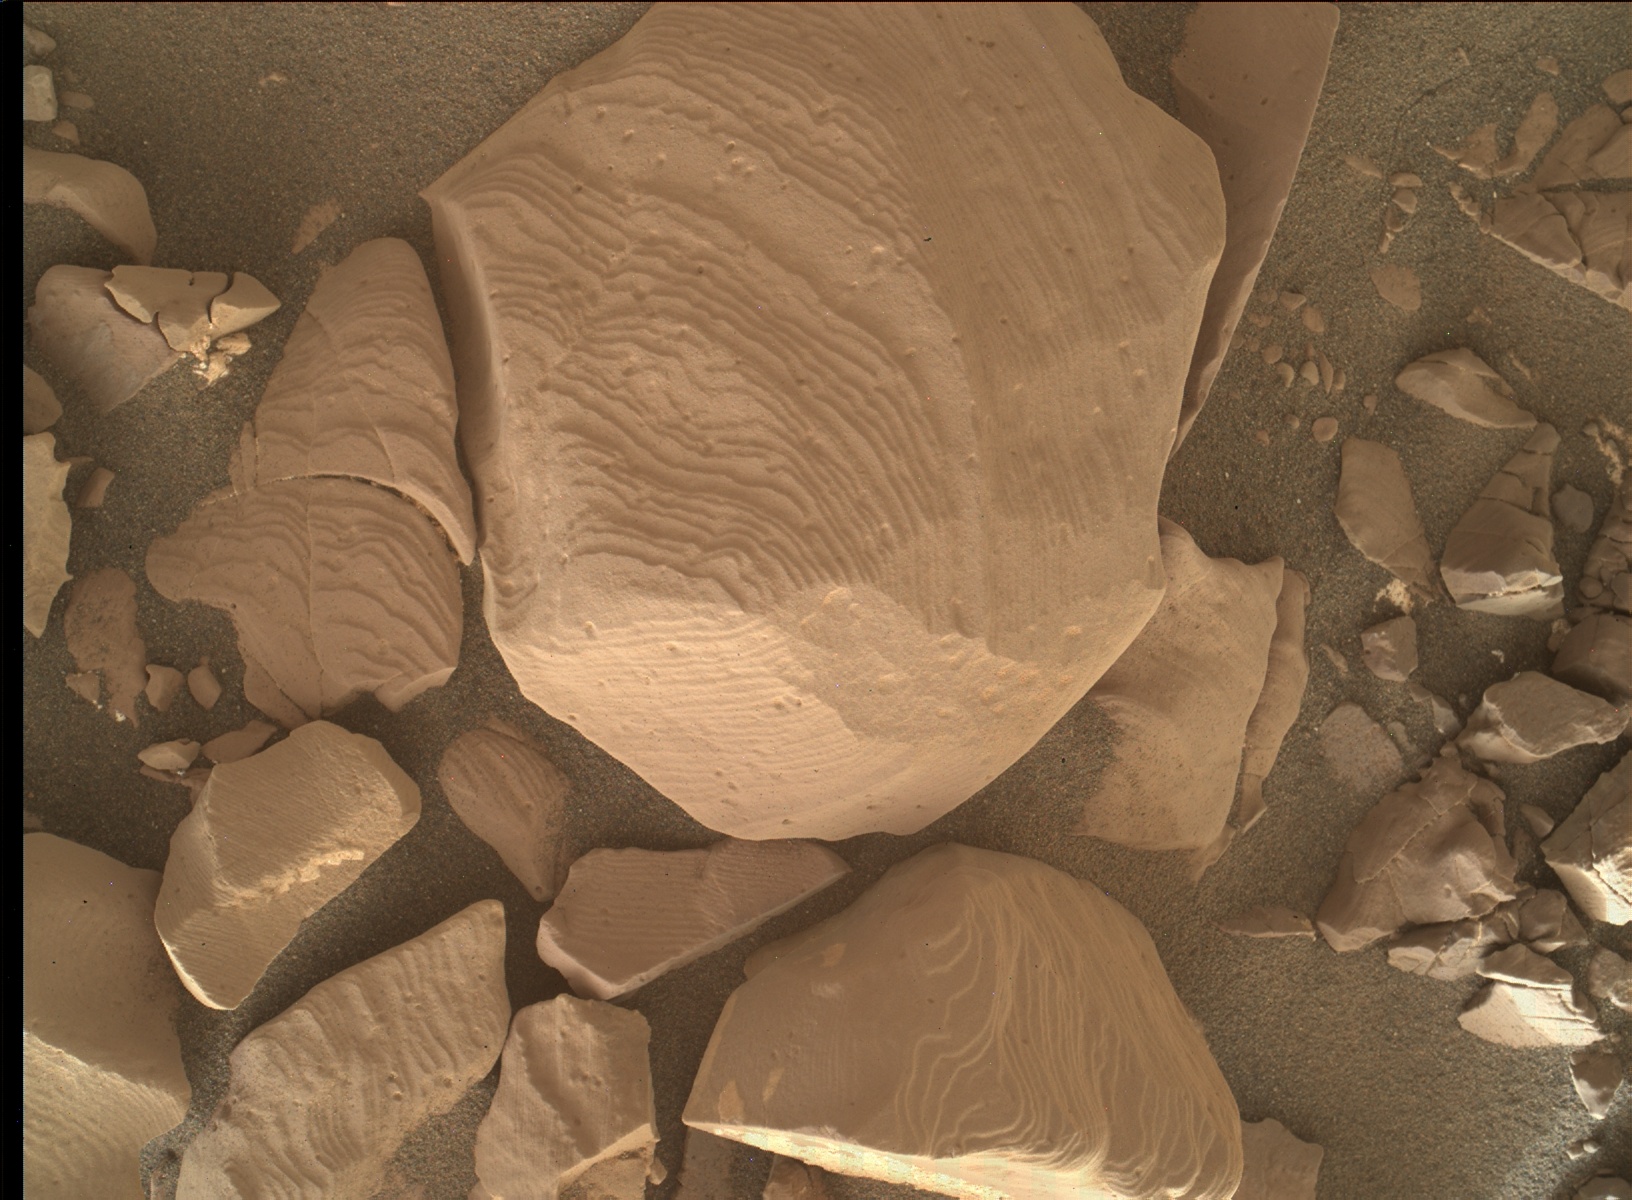 Nasa's Mars rover Curiosity acquired this image using its Mars Hand Lens Imager (MAHLI) on Sol 1818